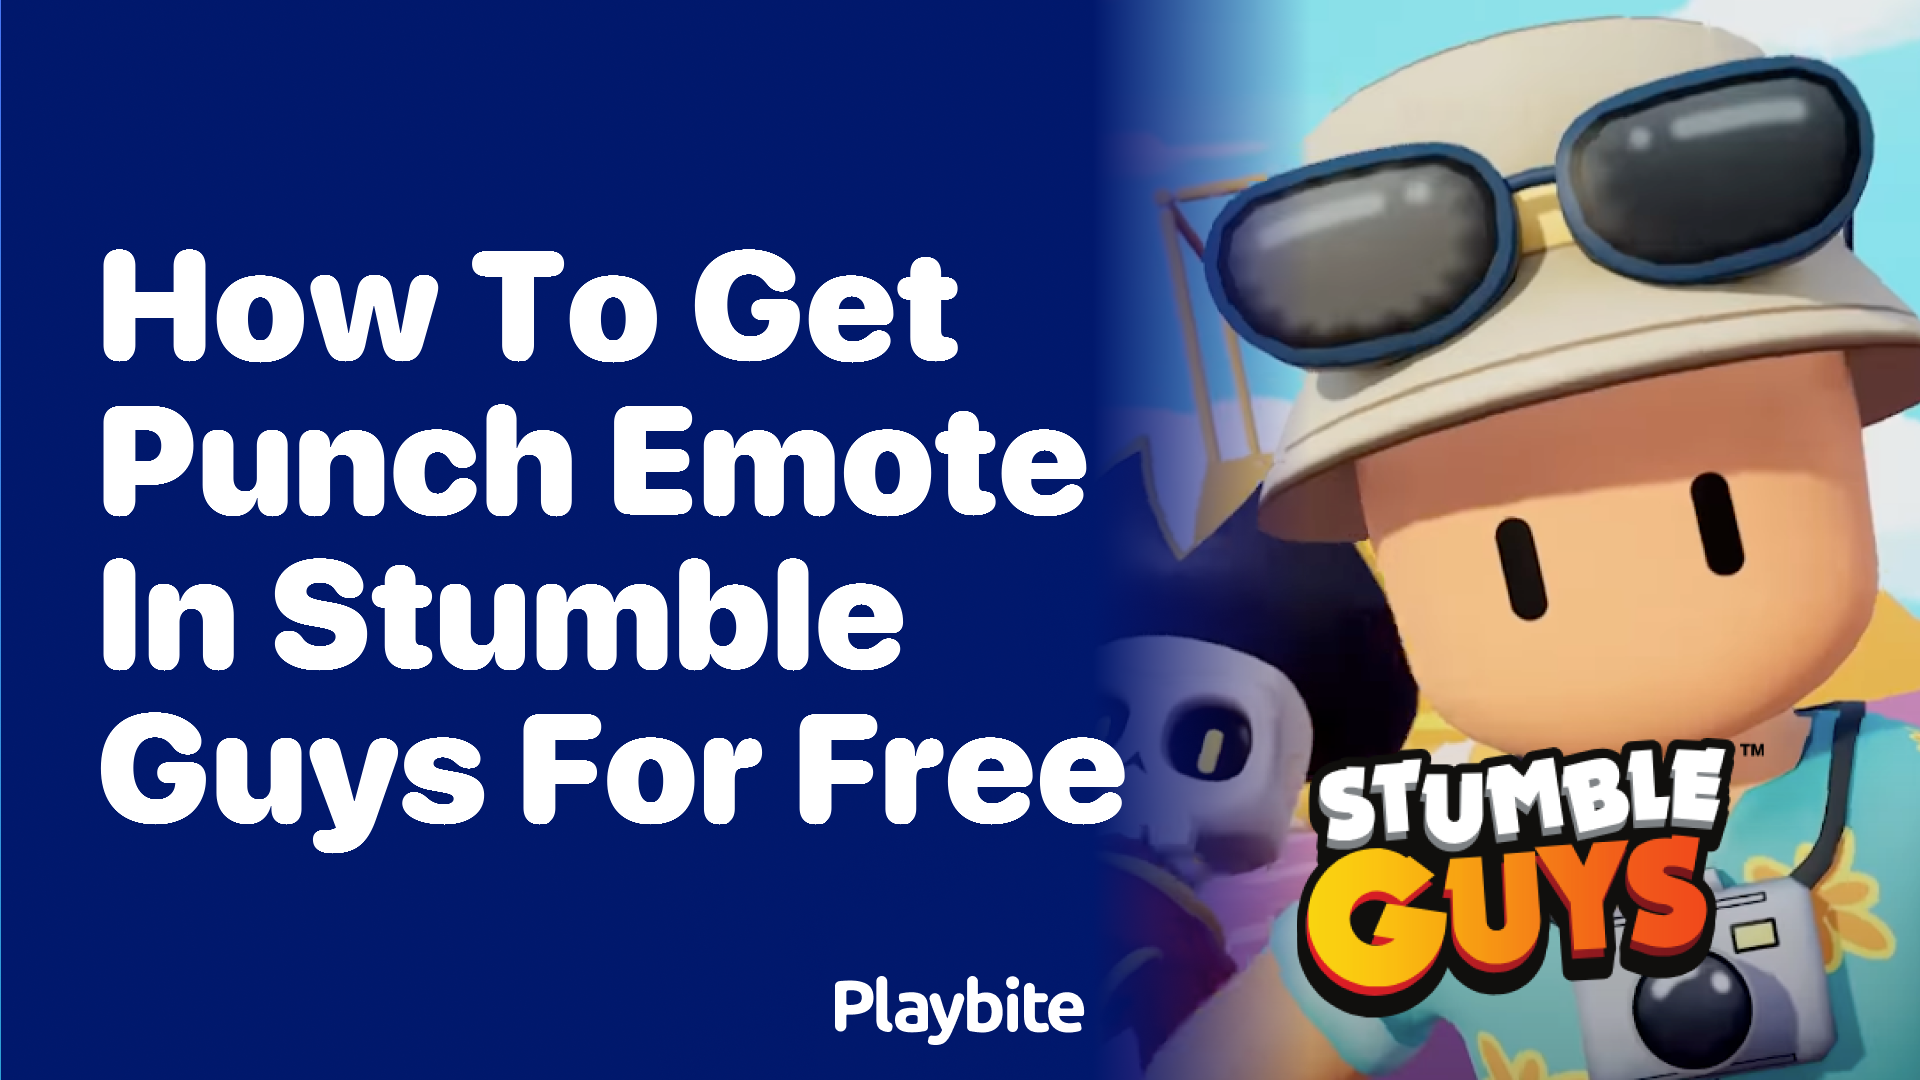 How to Get the Punch Emote in Stumble Guys for Free